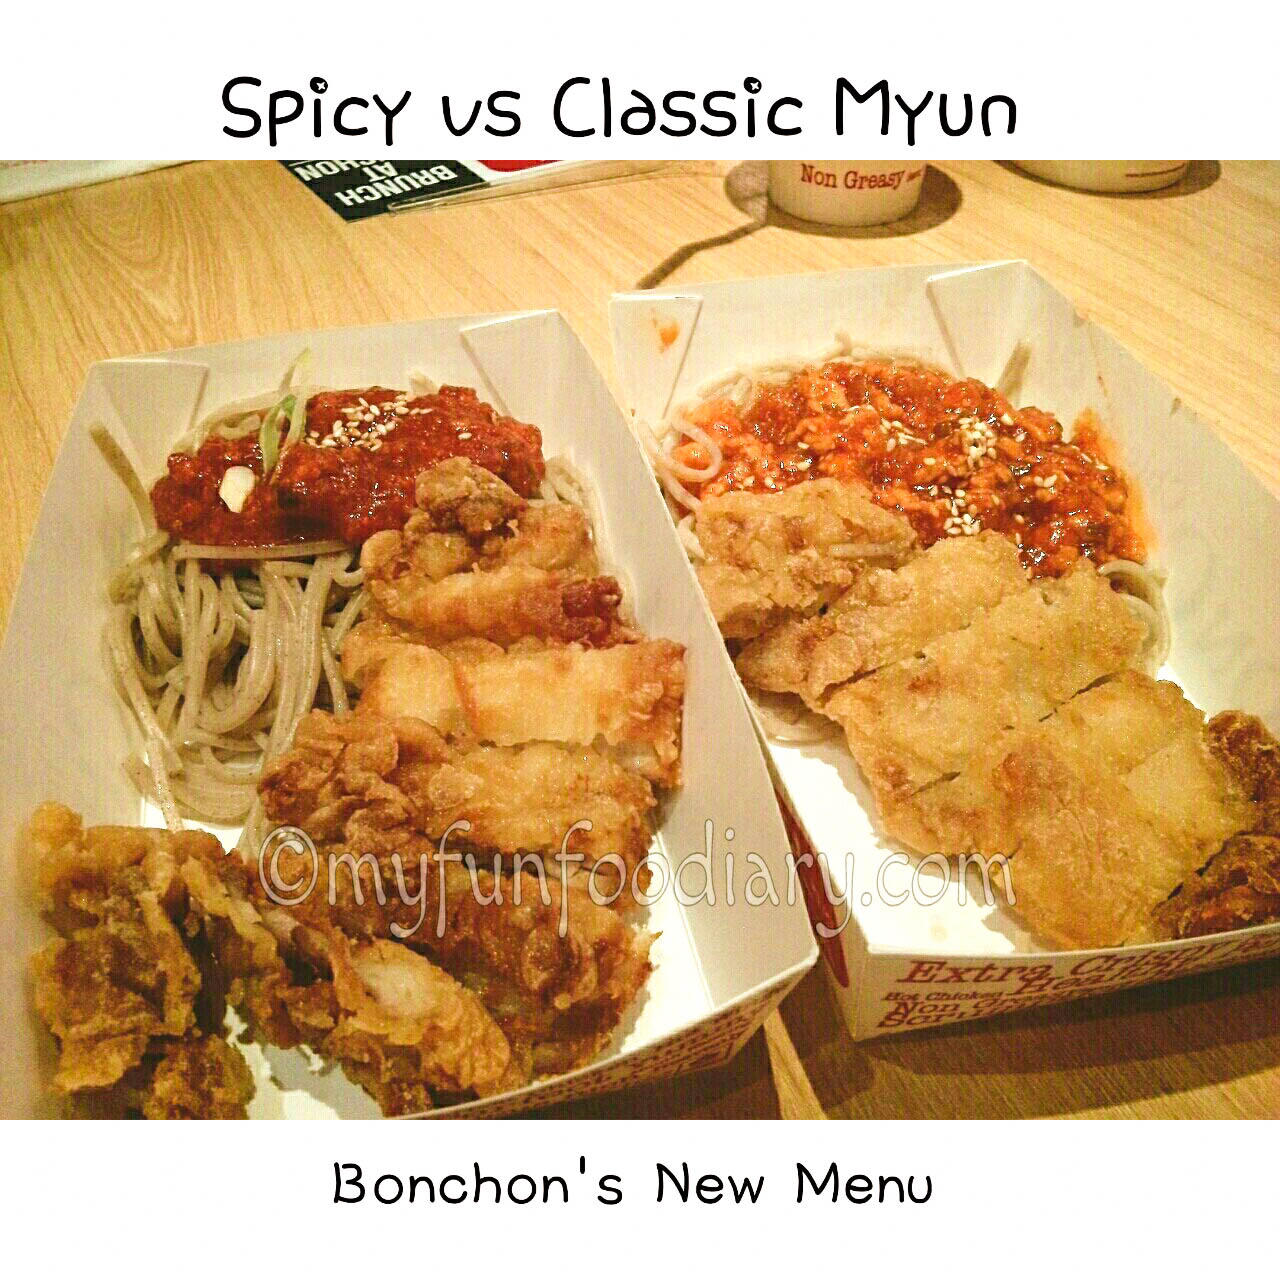 Classic and Spicy Myun